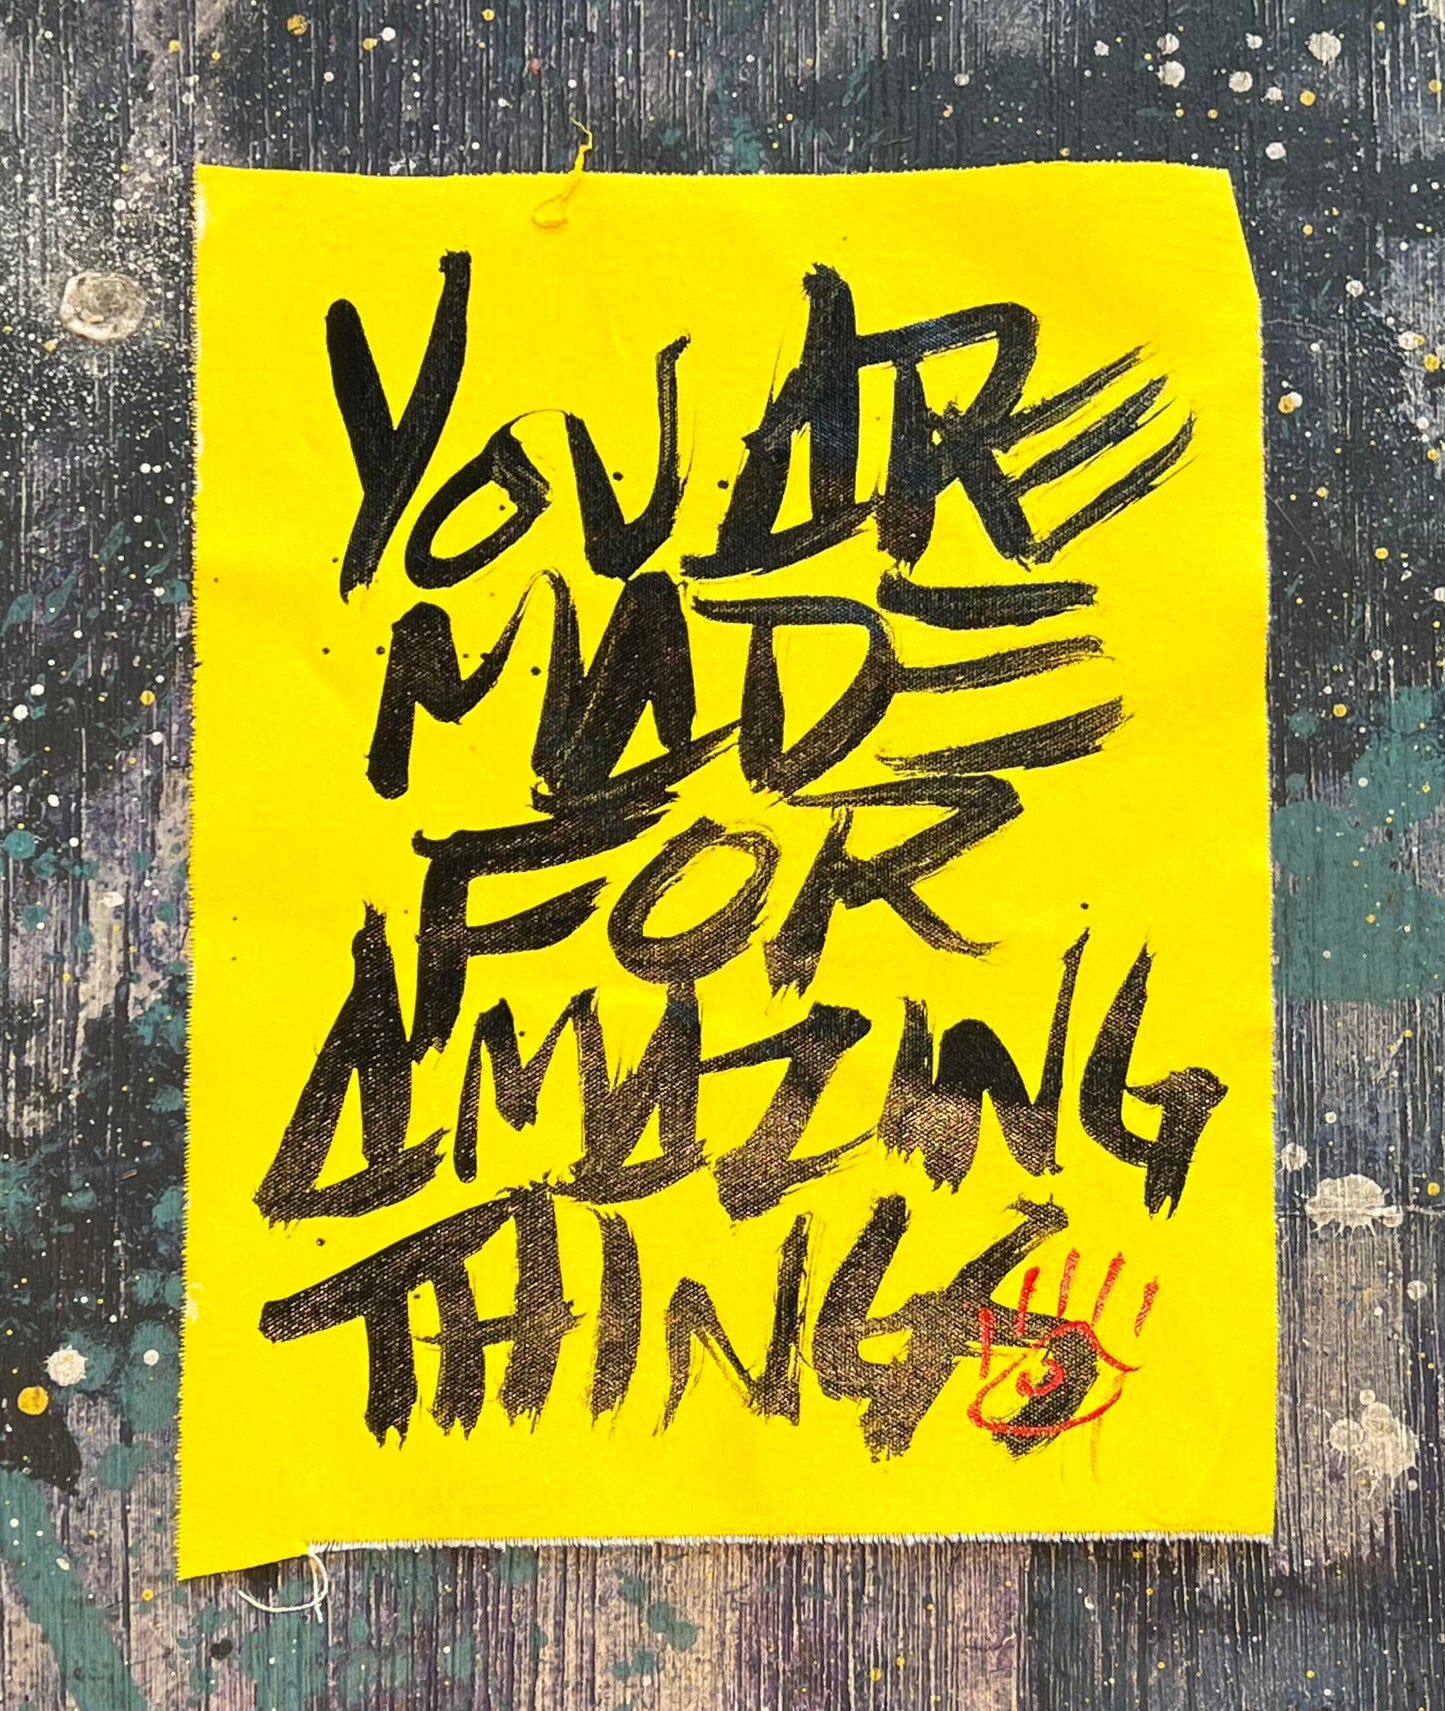 Amazing things / gold mantra / August 2023